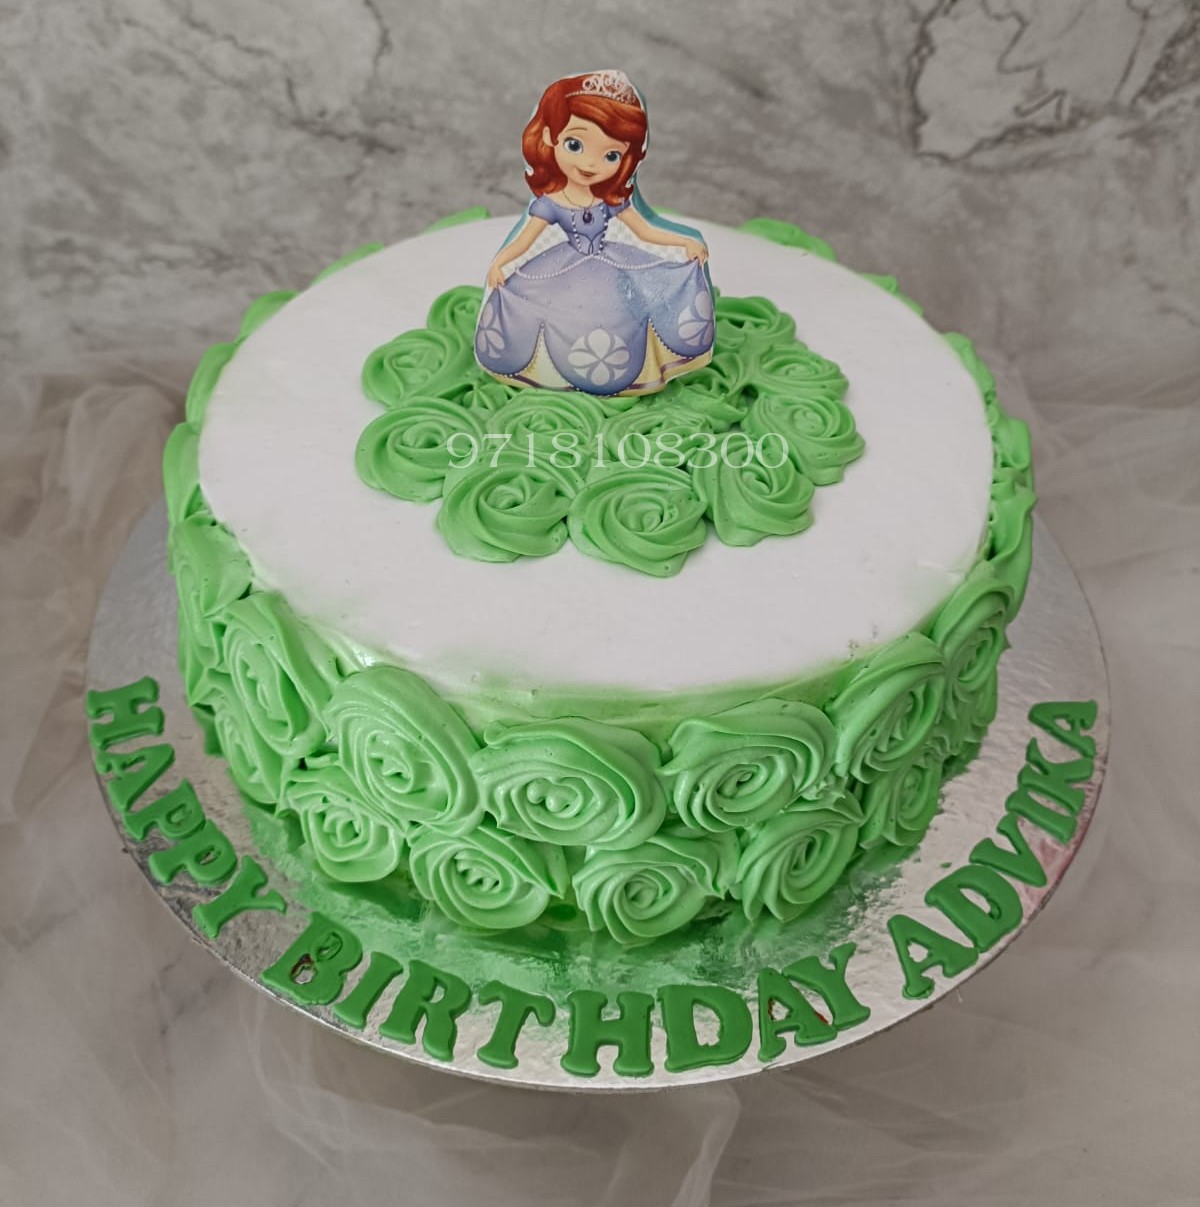 SIMPLE #SOFIA THE FIRST CAKE... - Glaiza's CAKES and Cupcakes | Facebook